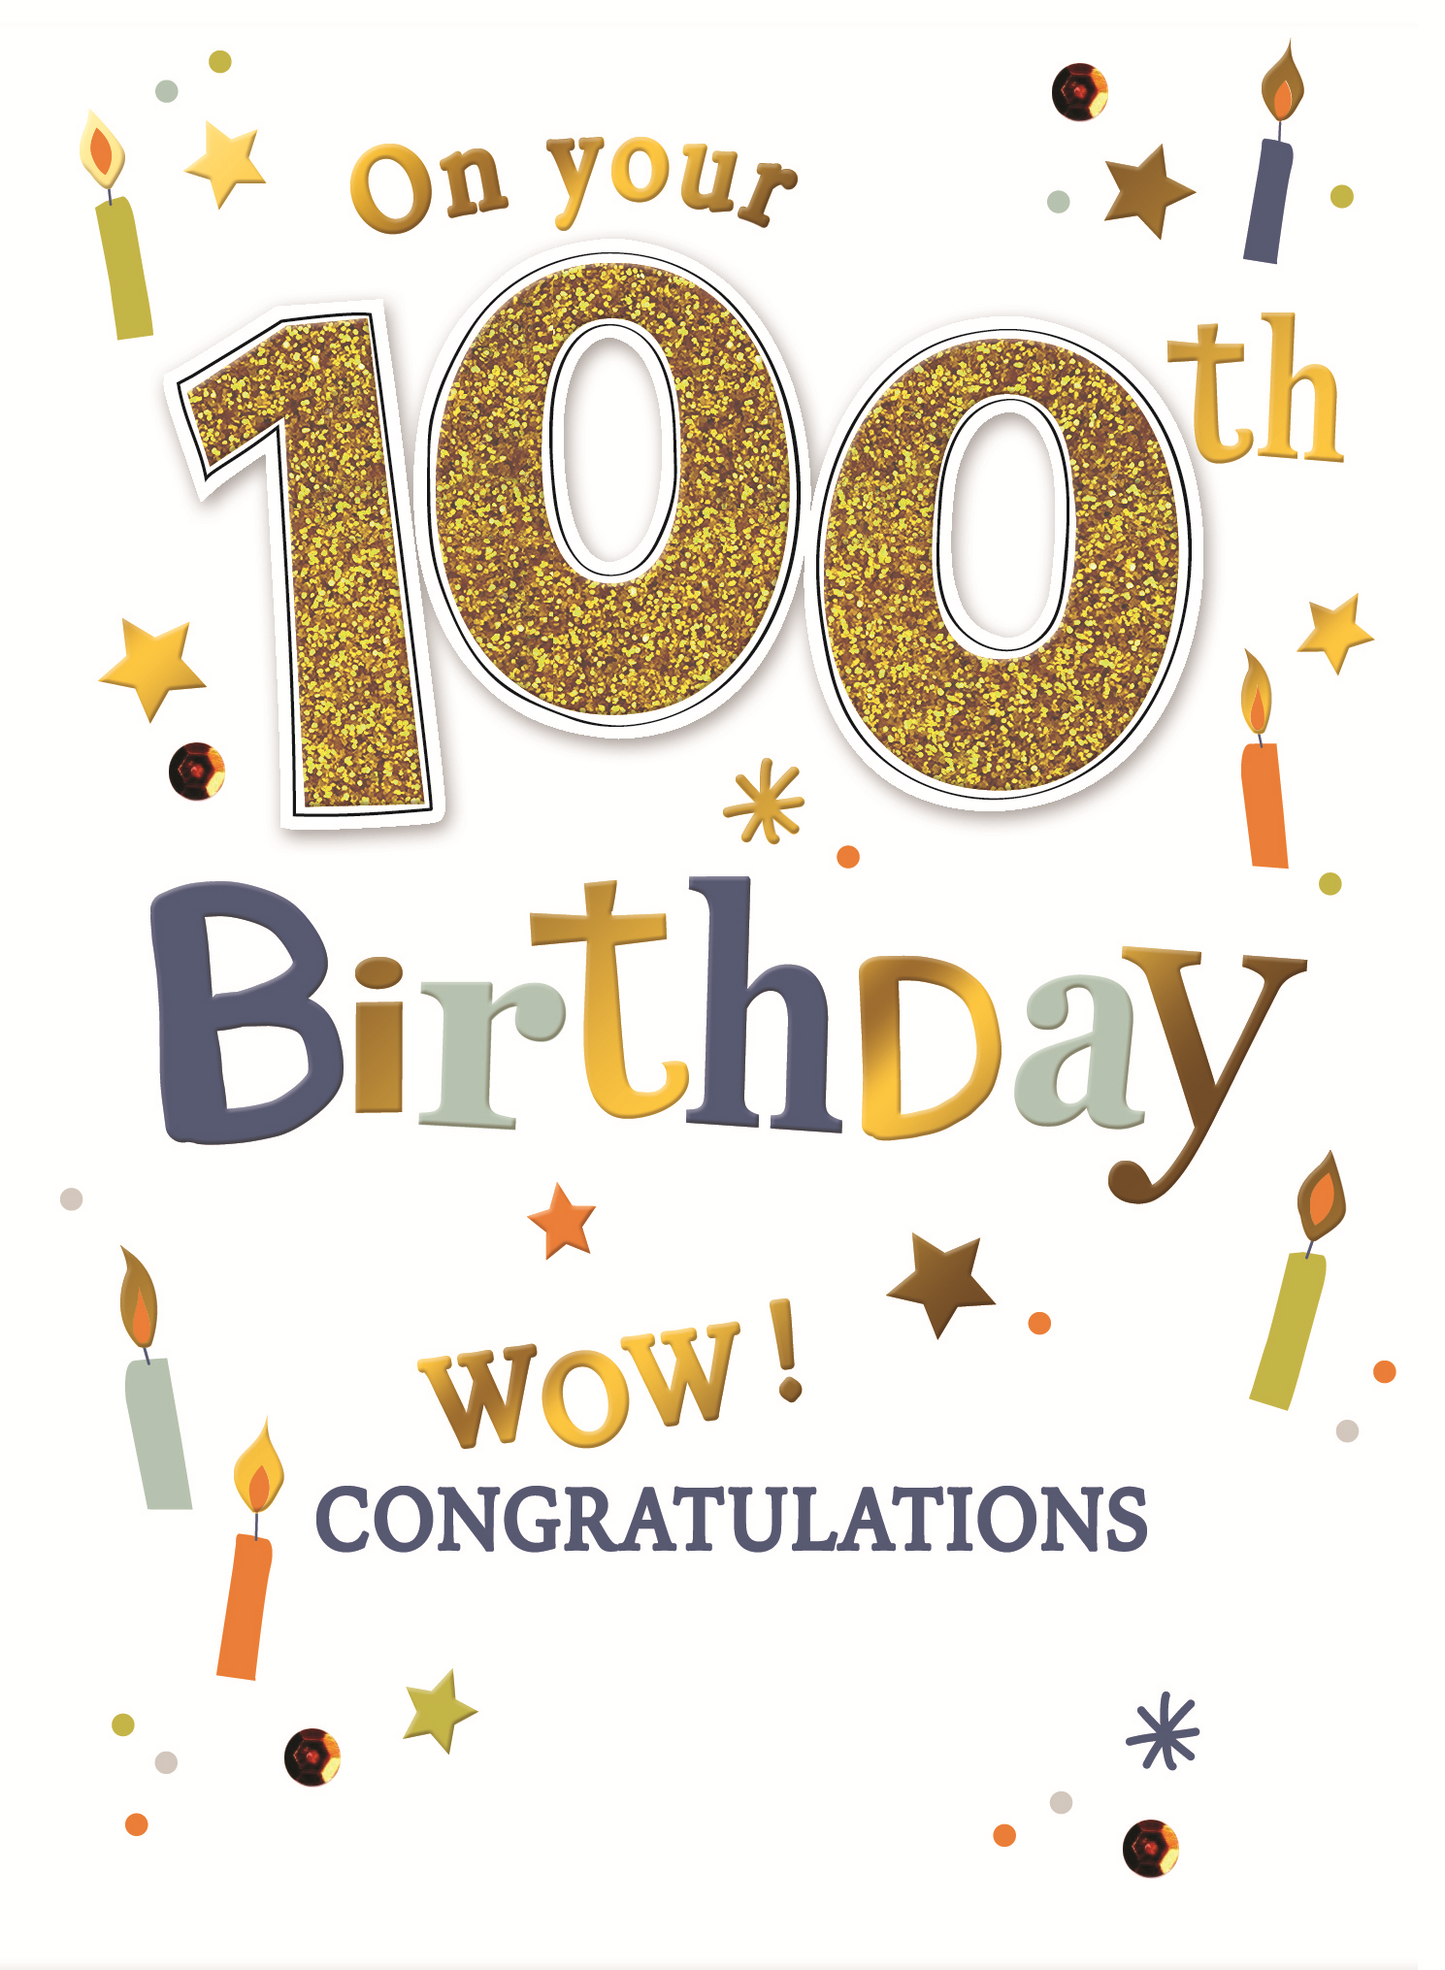 On Your 100th Birthday Greeting Card